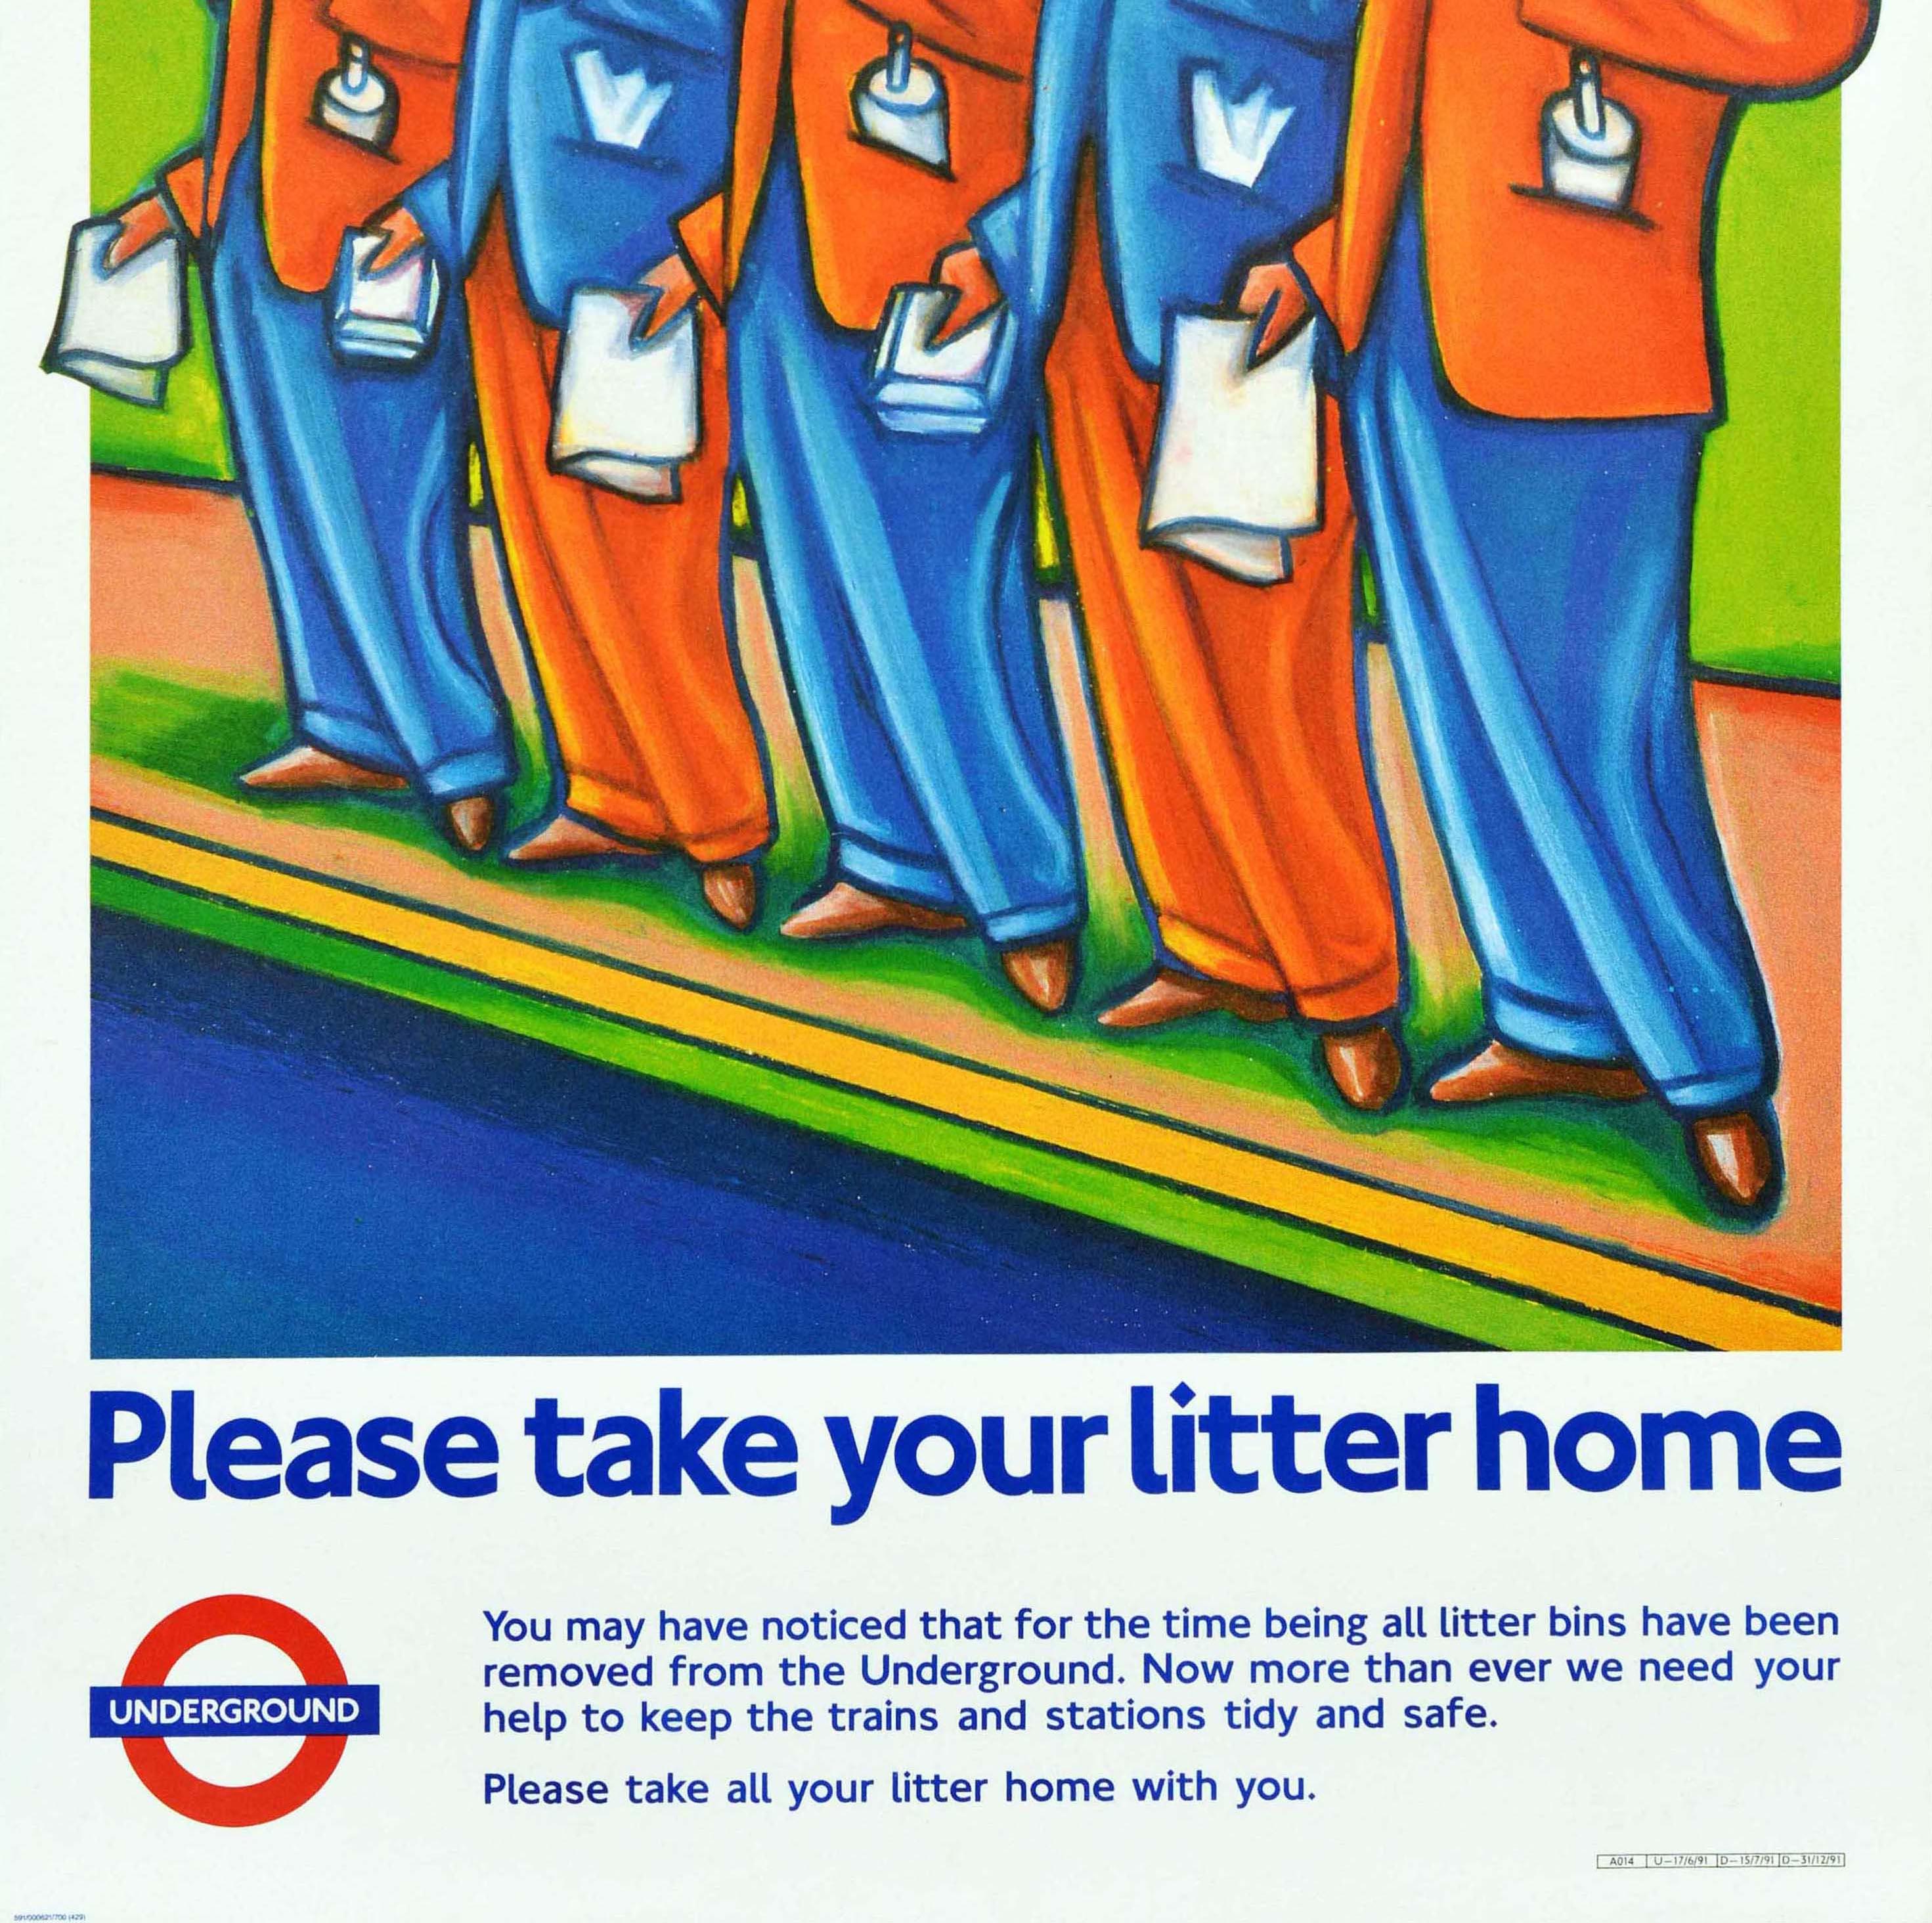 Original vintage London Underground poster - Please take your litter home You may have noticed that for the time being all litter bins have been removed from the Underground. Now more than ever we need your help to keep the trains and stations tidy